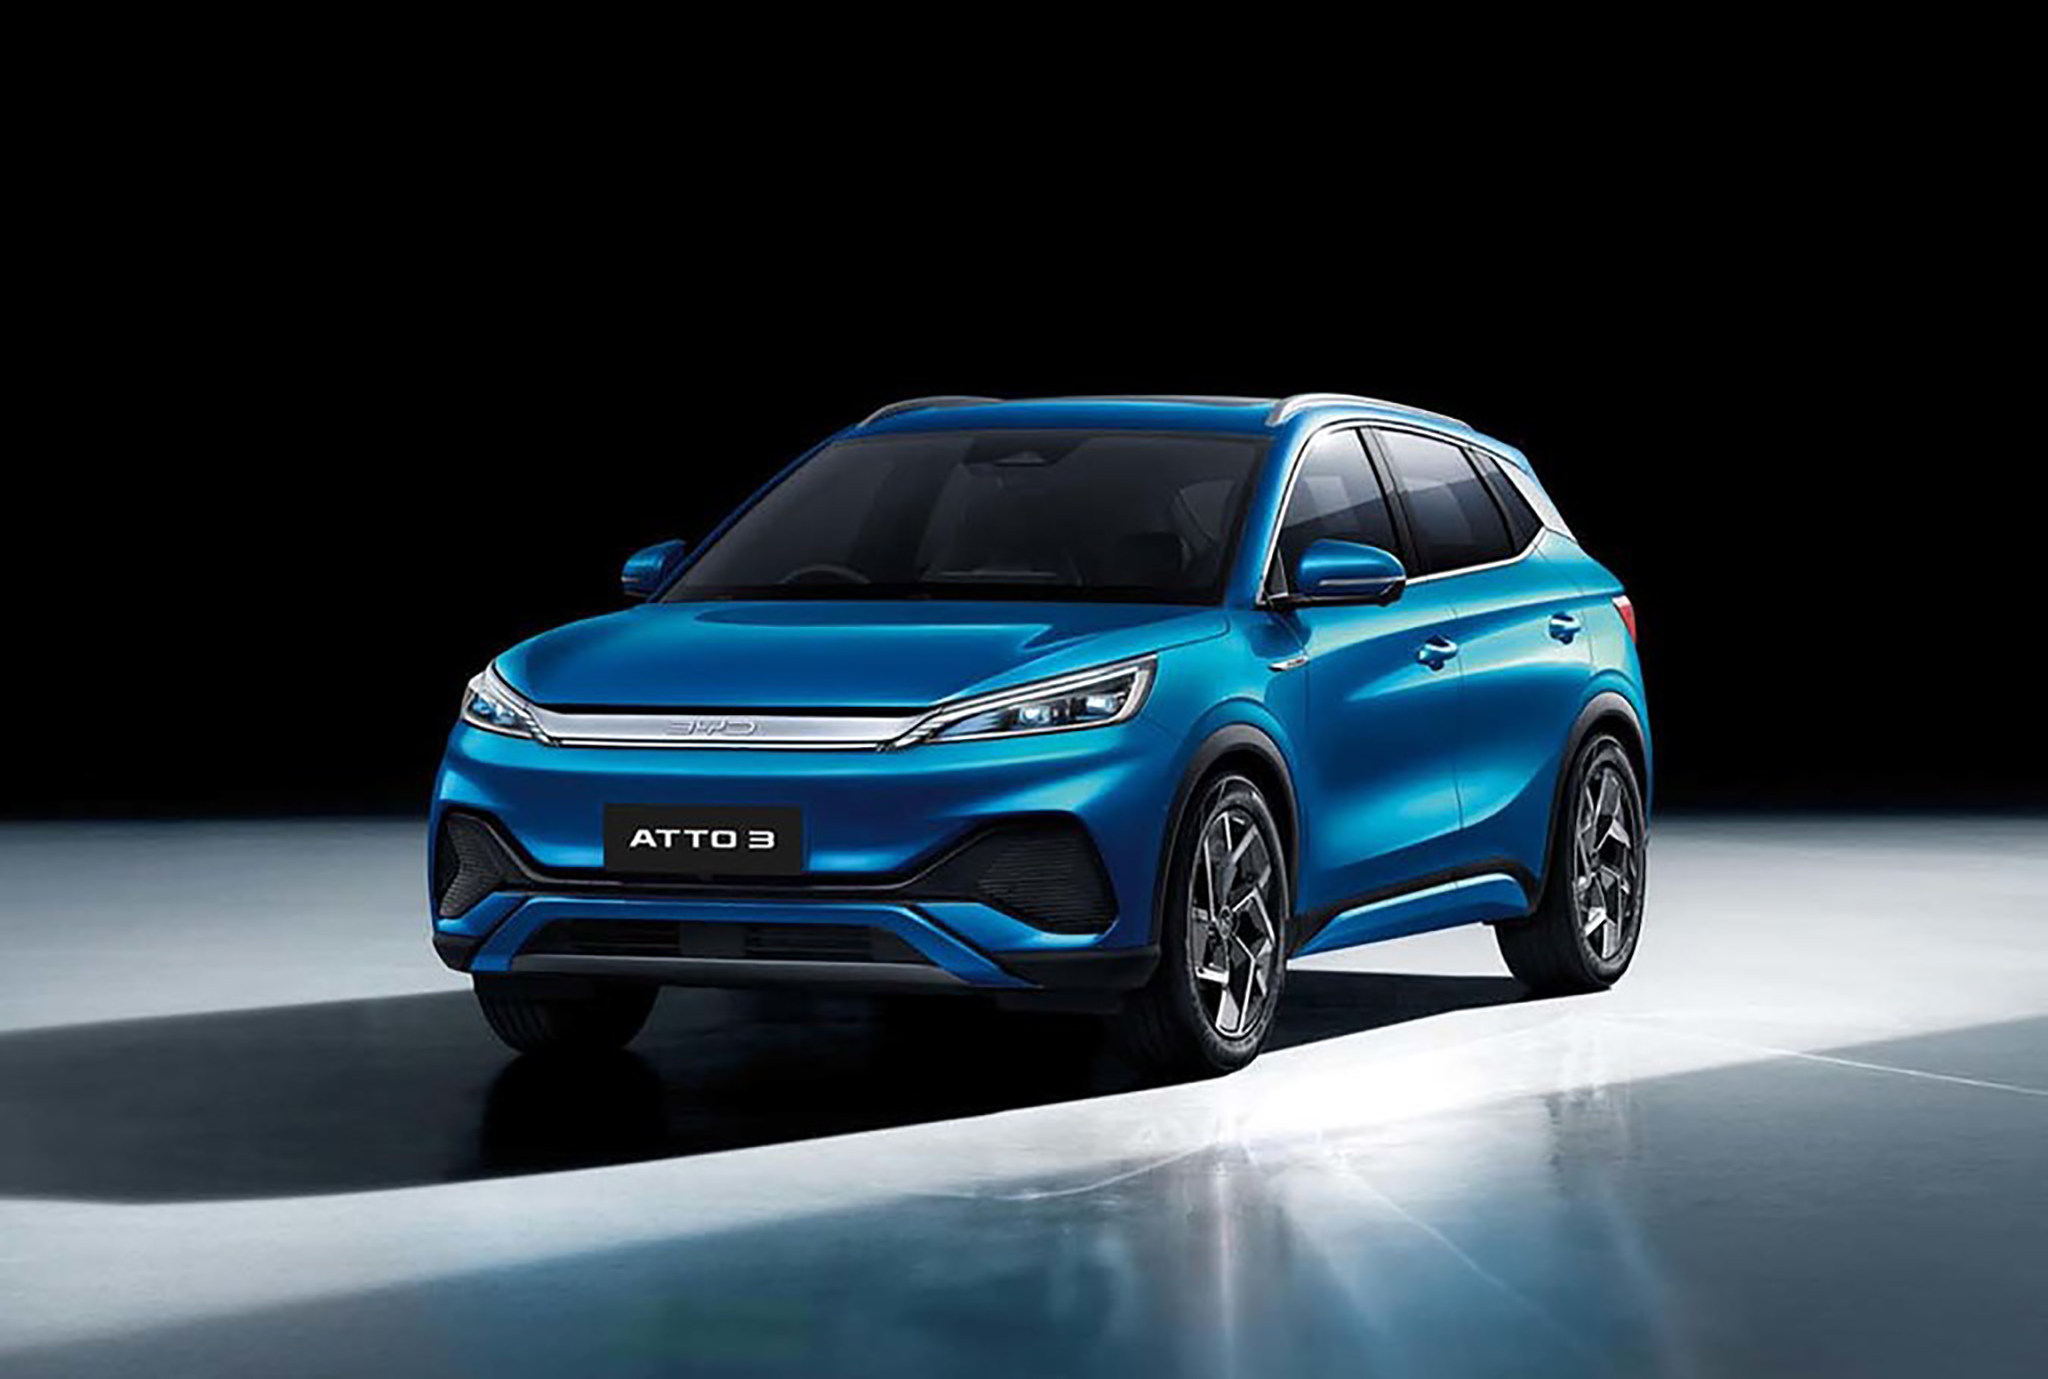 BYD introduced its first EV, the Atto 3 SUV, last year. It is planning to sell 15,000 electric cars this year. Photo: Handout